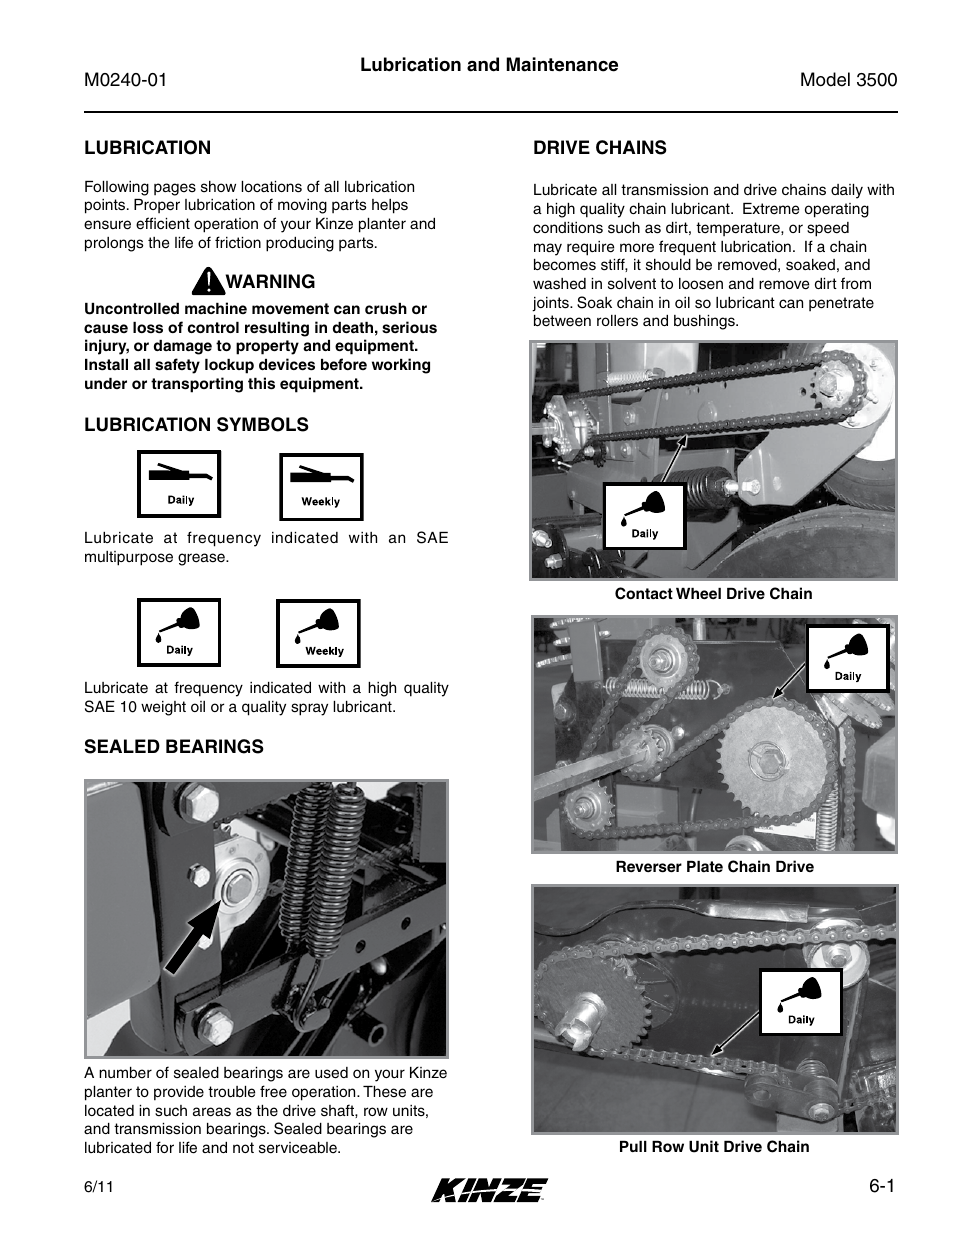 Kinze 3500 Lift and Rotate Planter Rev. 7/14 User Manual | Page 97 / 140